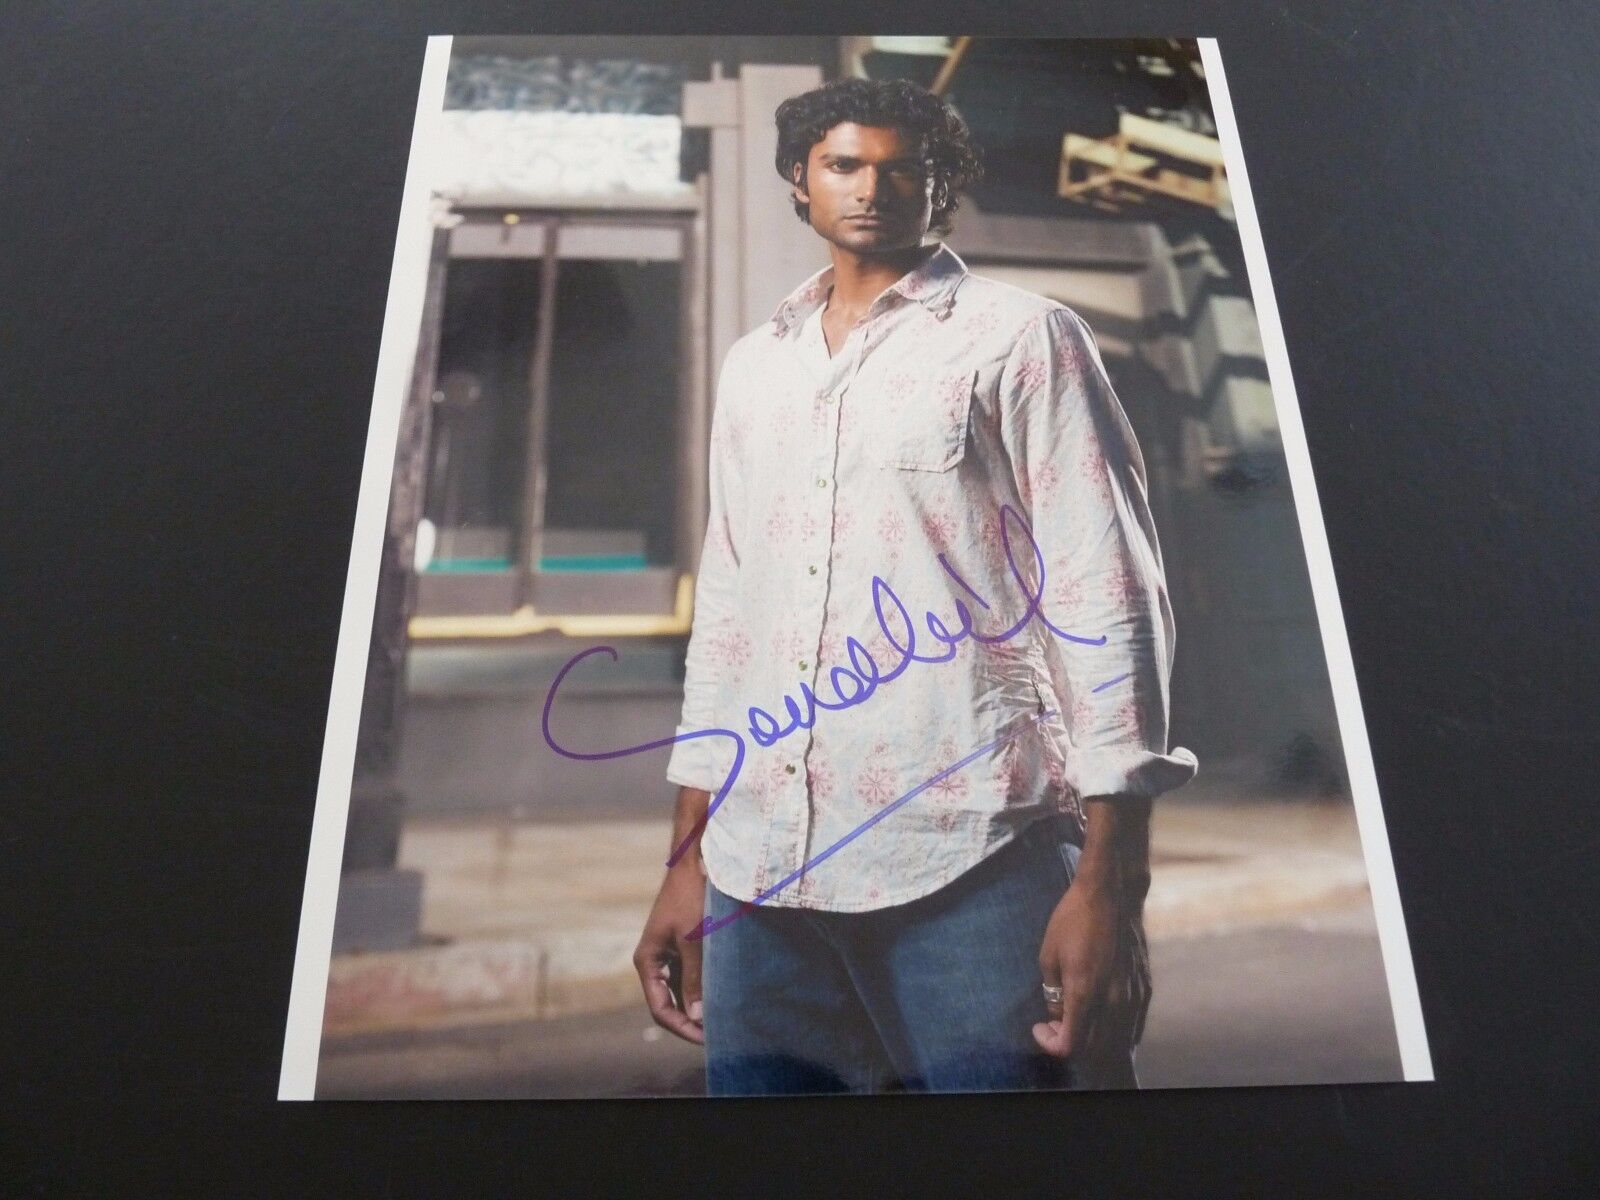 Sendhil Ramamurthy Autographed Heroes Signed 8x10 Photo Poster painting PSA or Beckett Guarantee